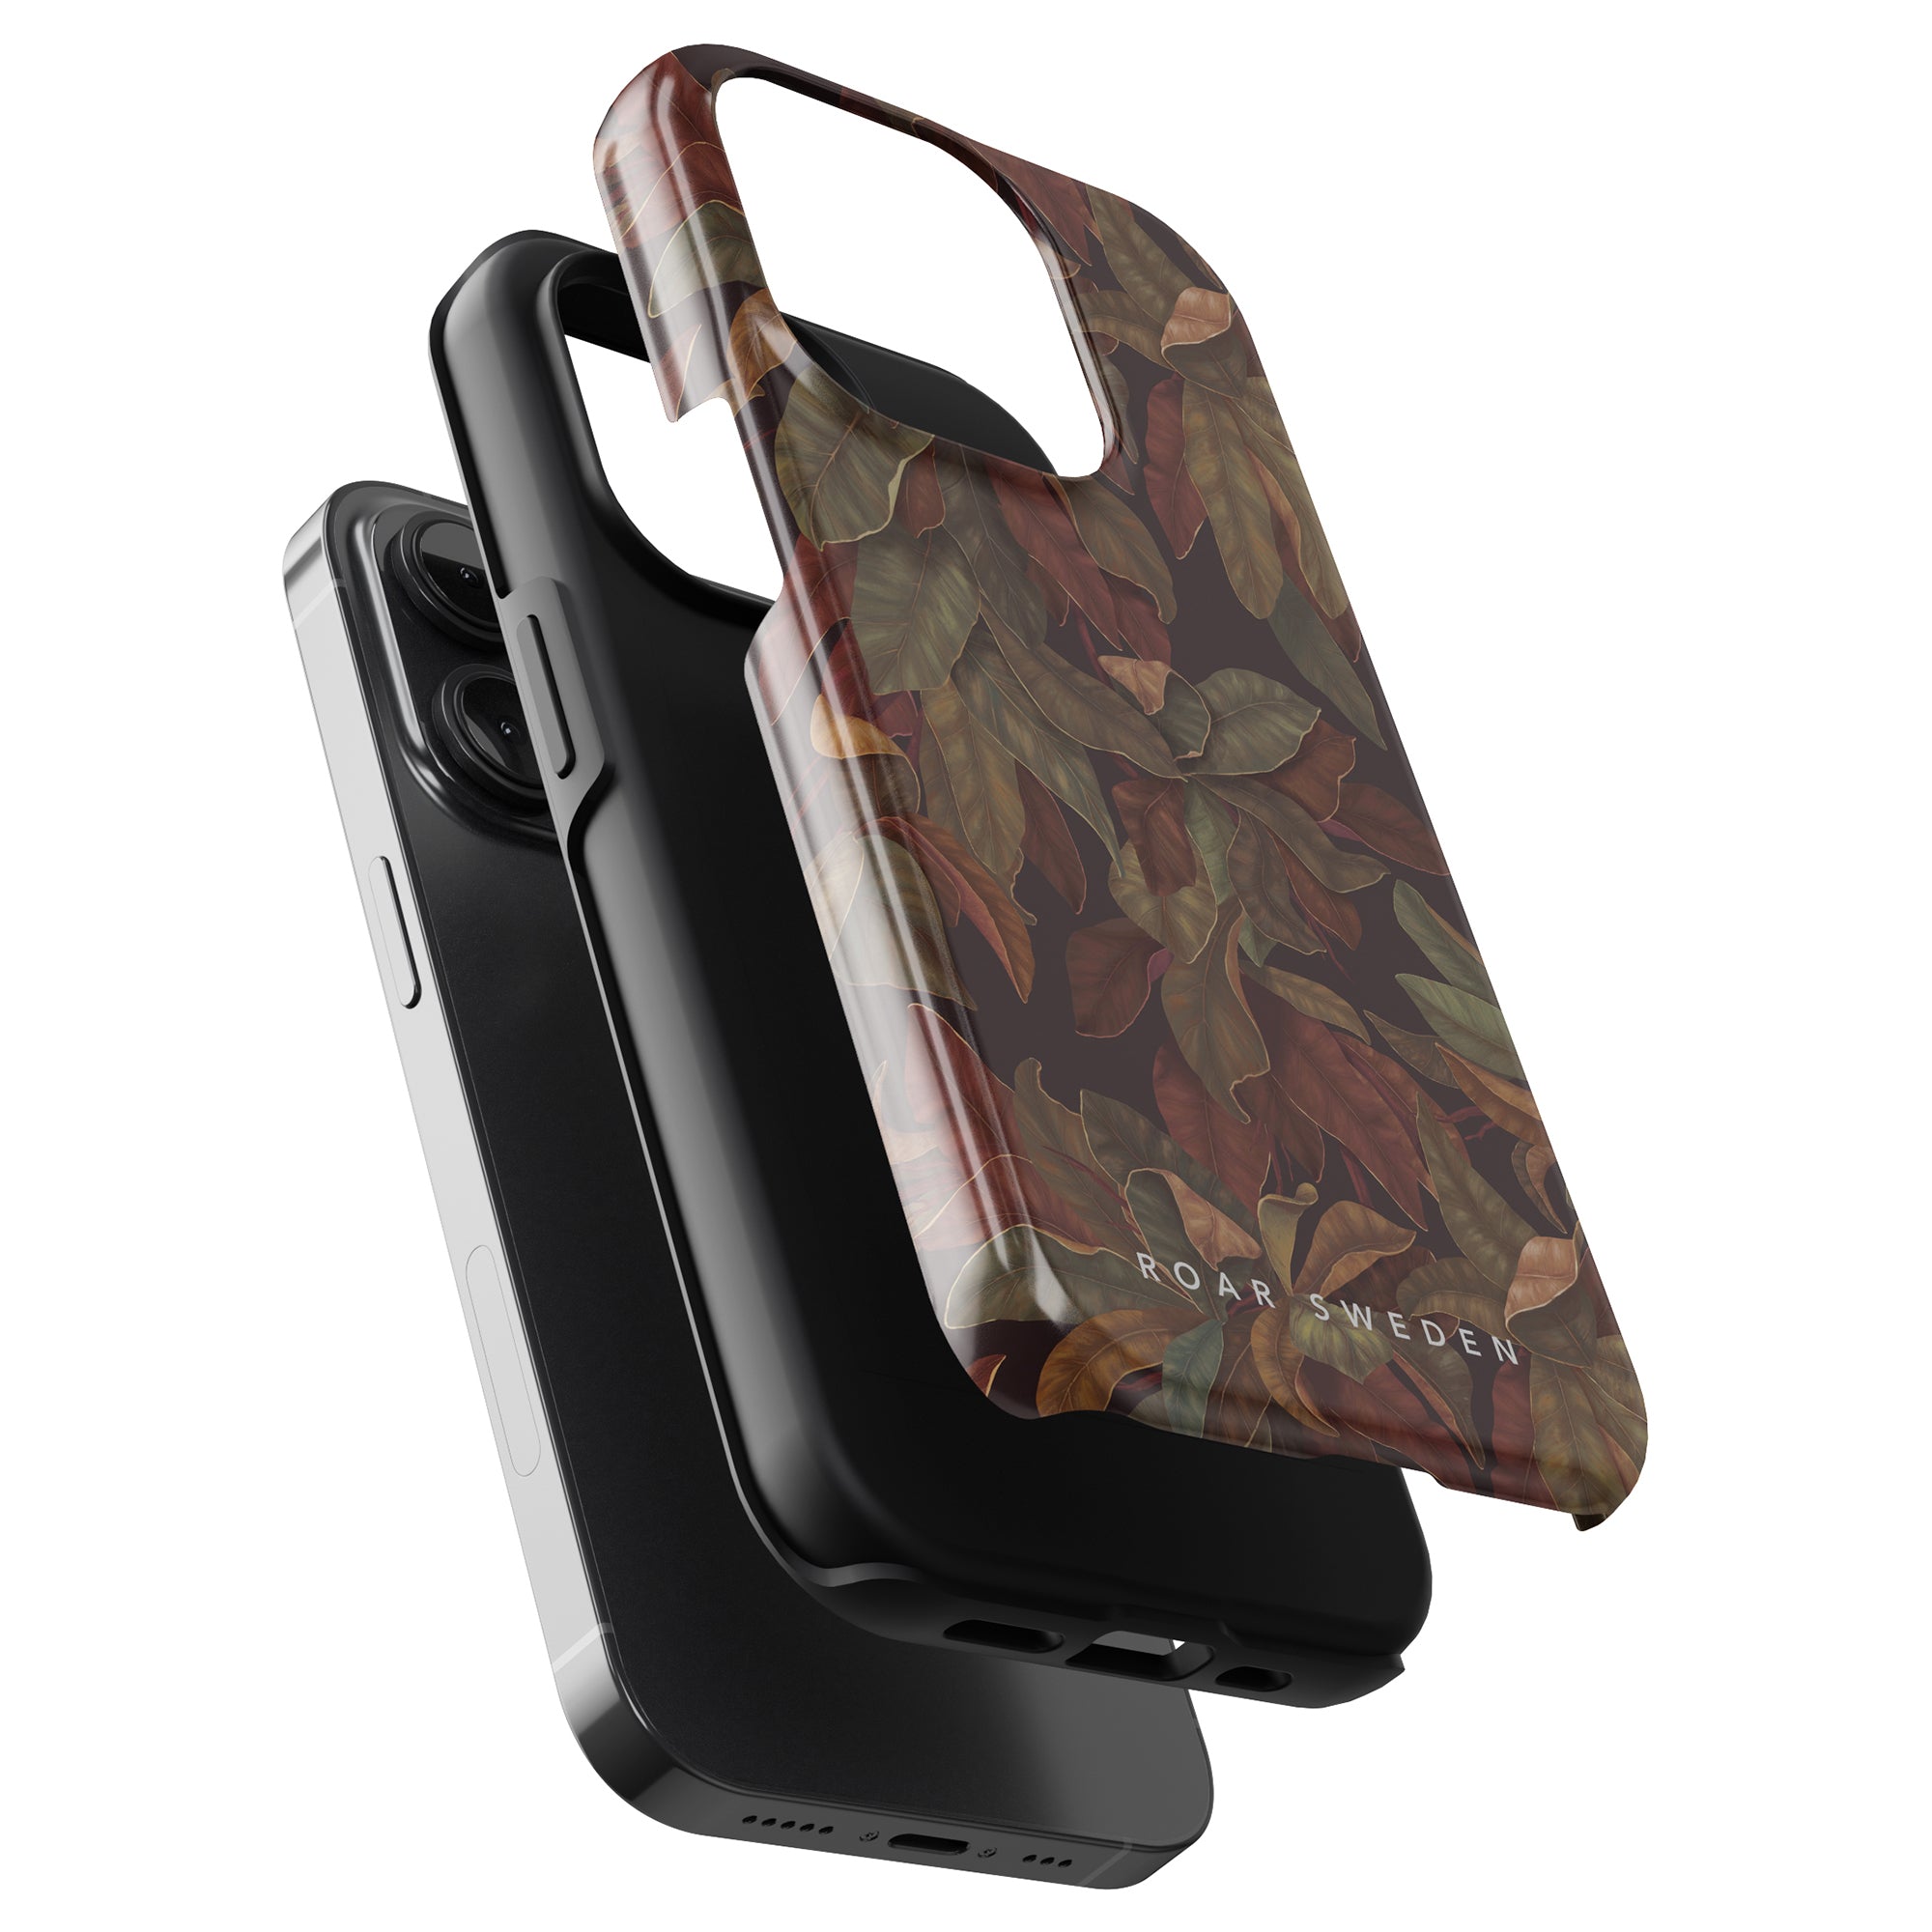 The Autumn - Tough Case has a pattern of leaves on it. The product description is missing.